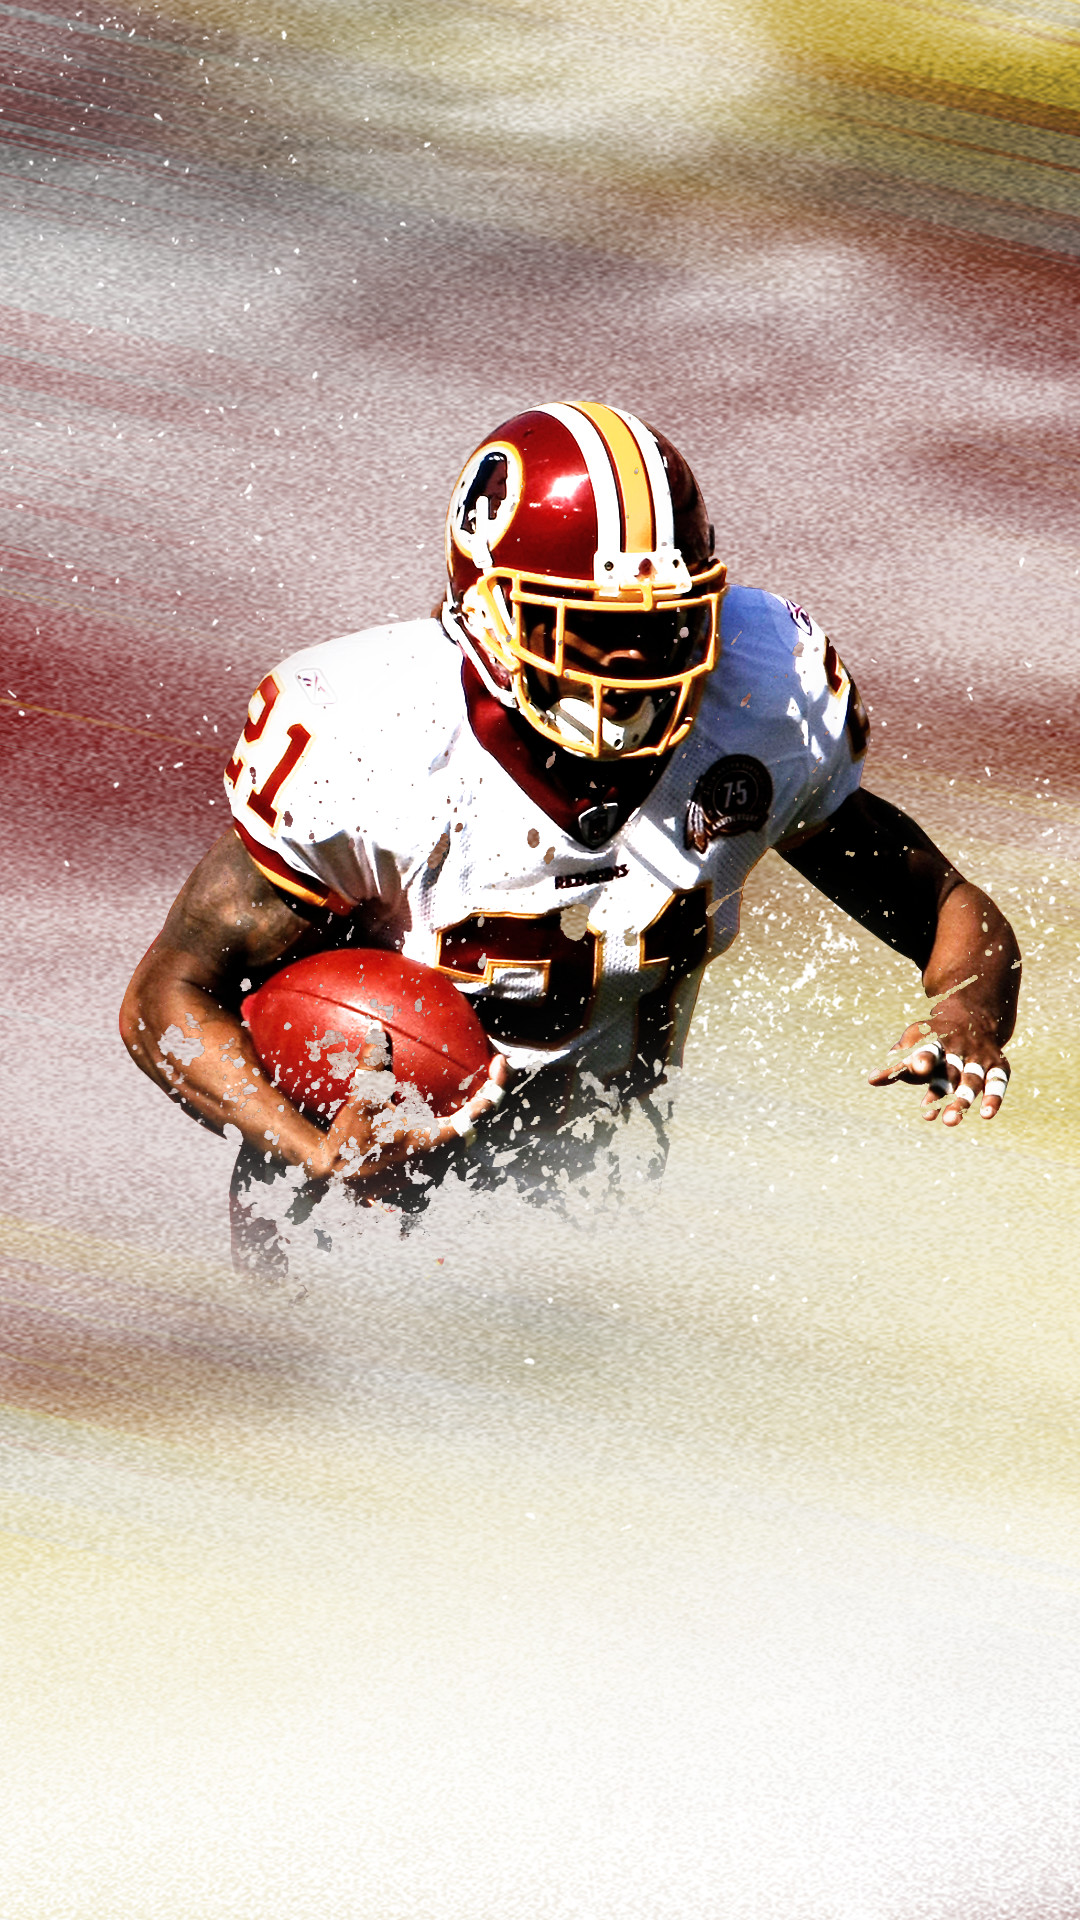 Made a Sean Taylor phone wallpaper for you guys, hope you enjoy it!